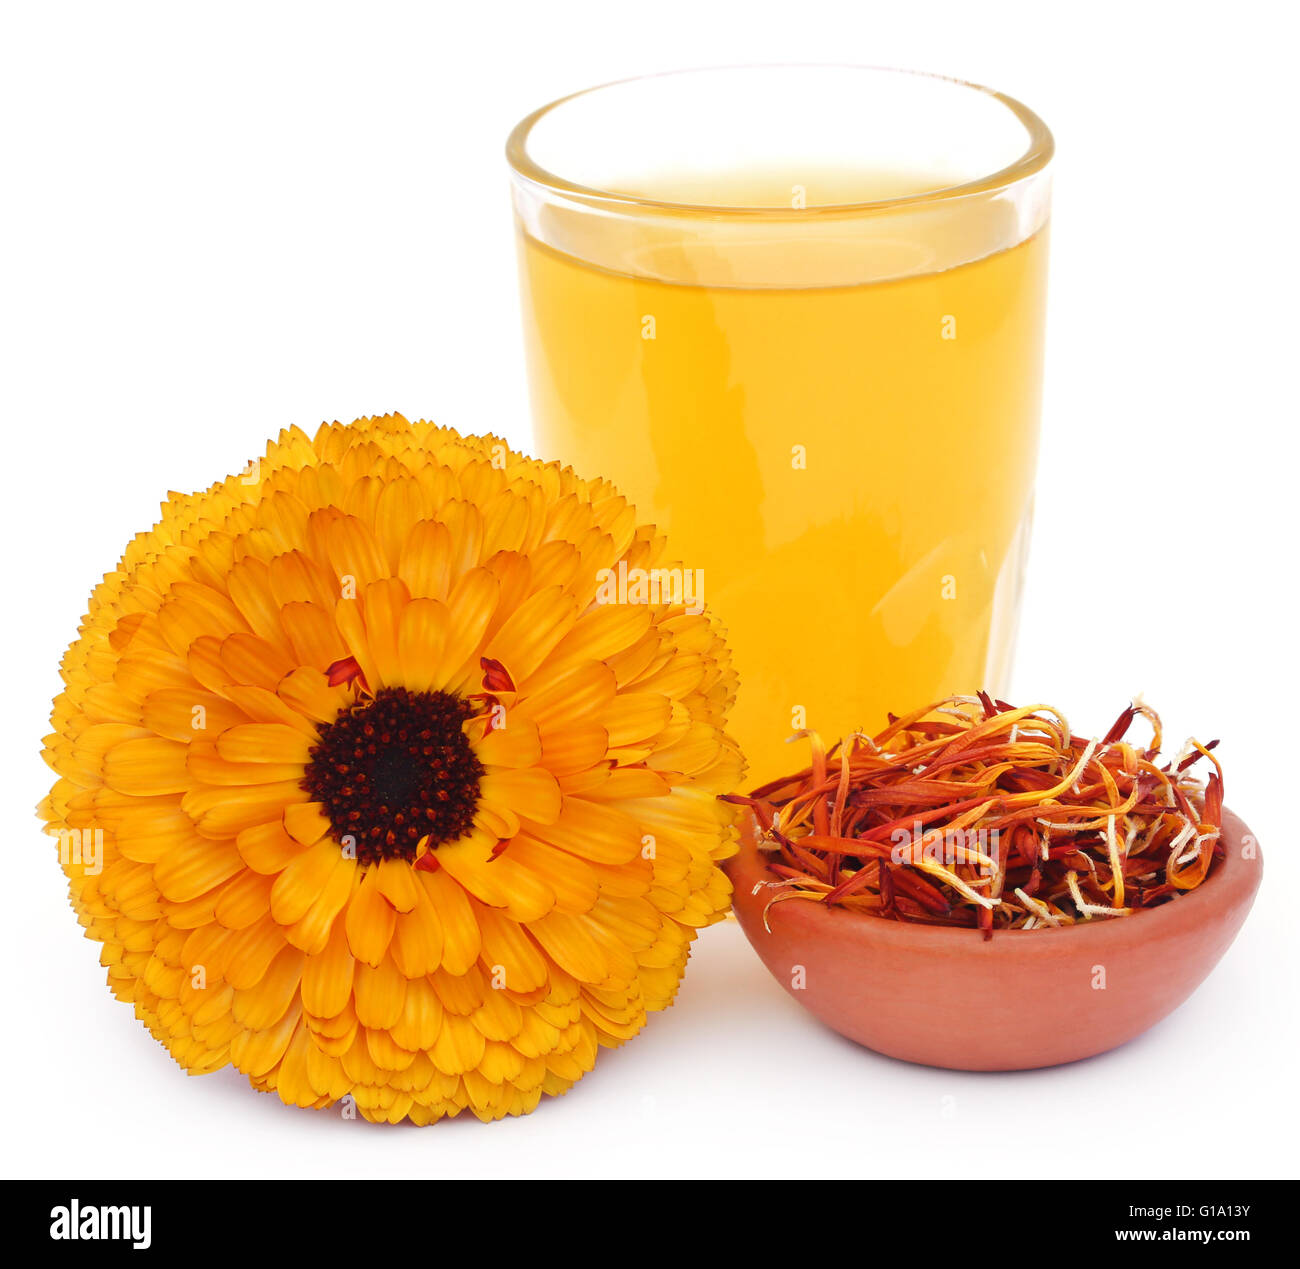 Herbal calendula flower with extract in a glass over white background Stock Photo